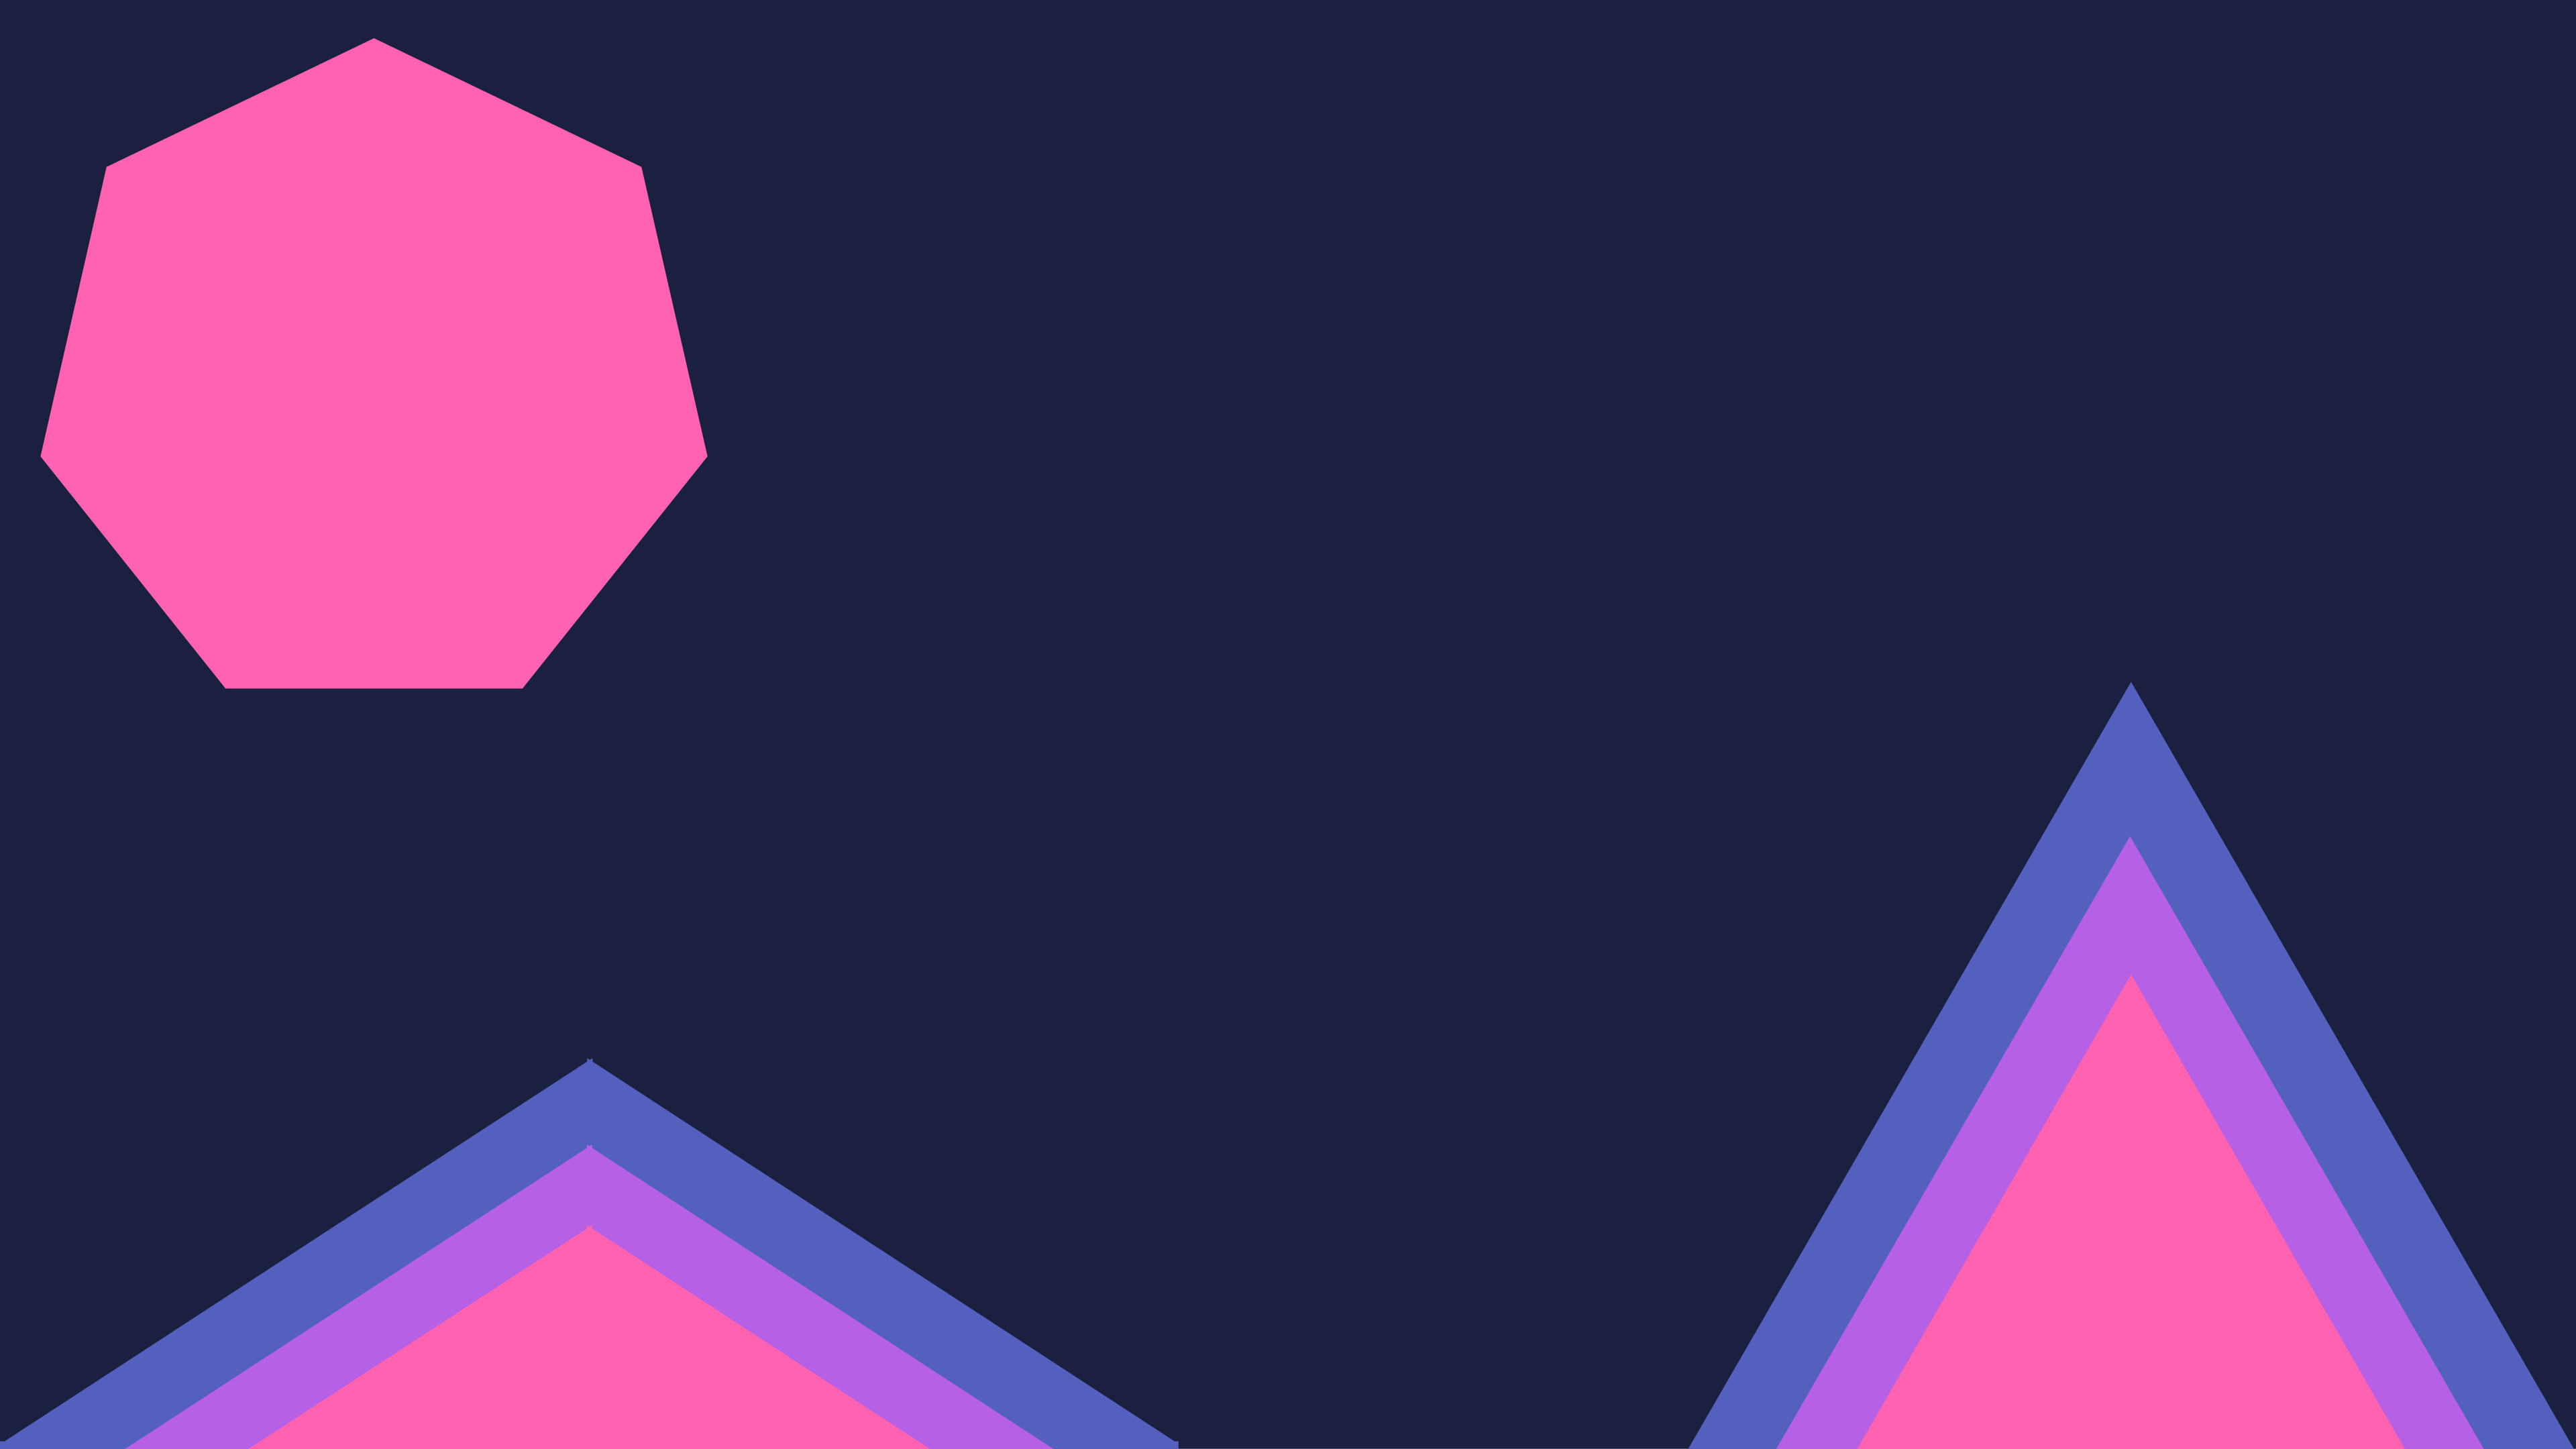 Material Design 4k Wallpaper 024 By Charlie Henson - Triangle - HD Wallpaper 